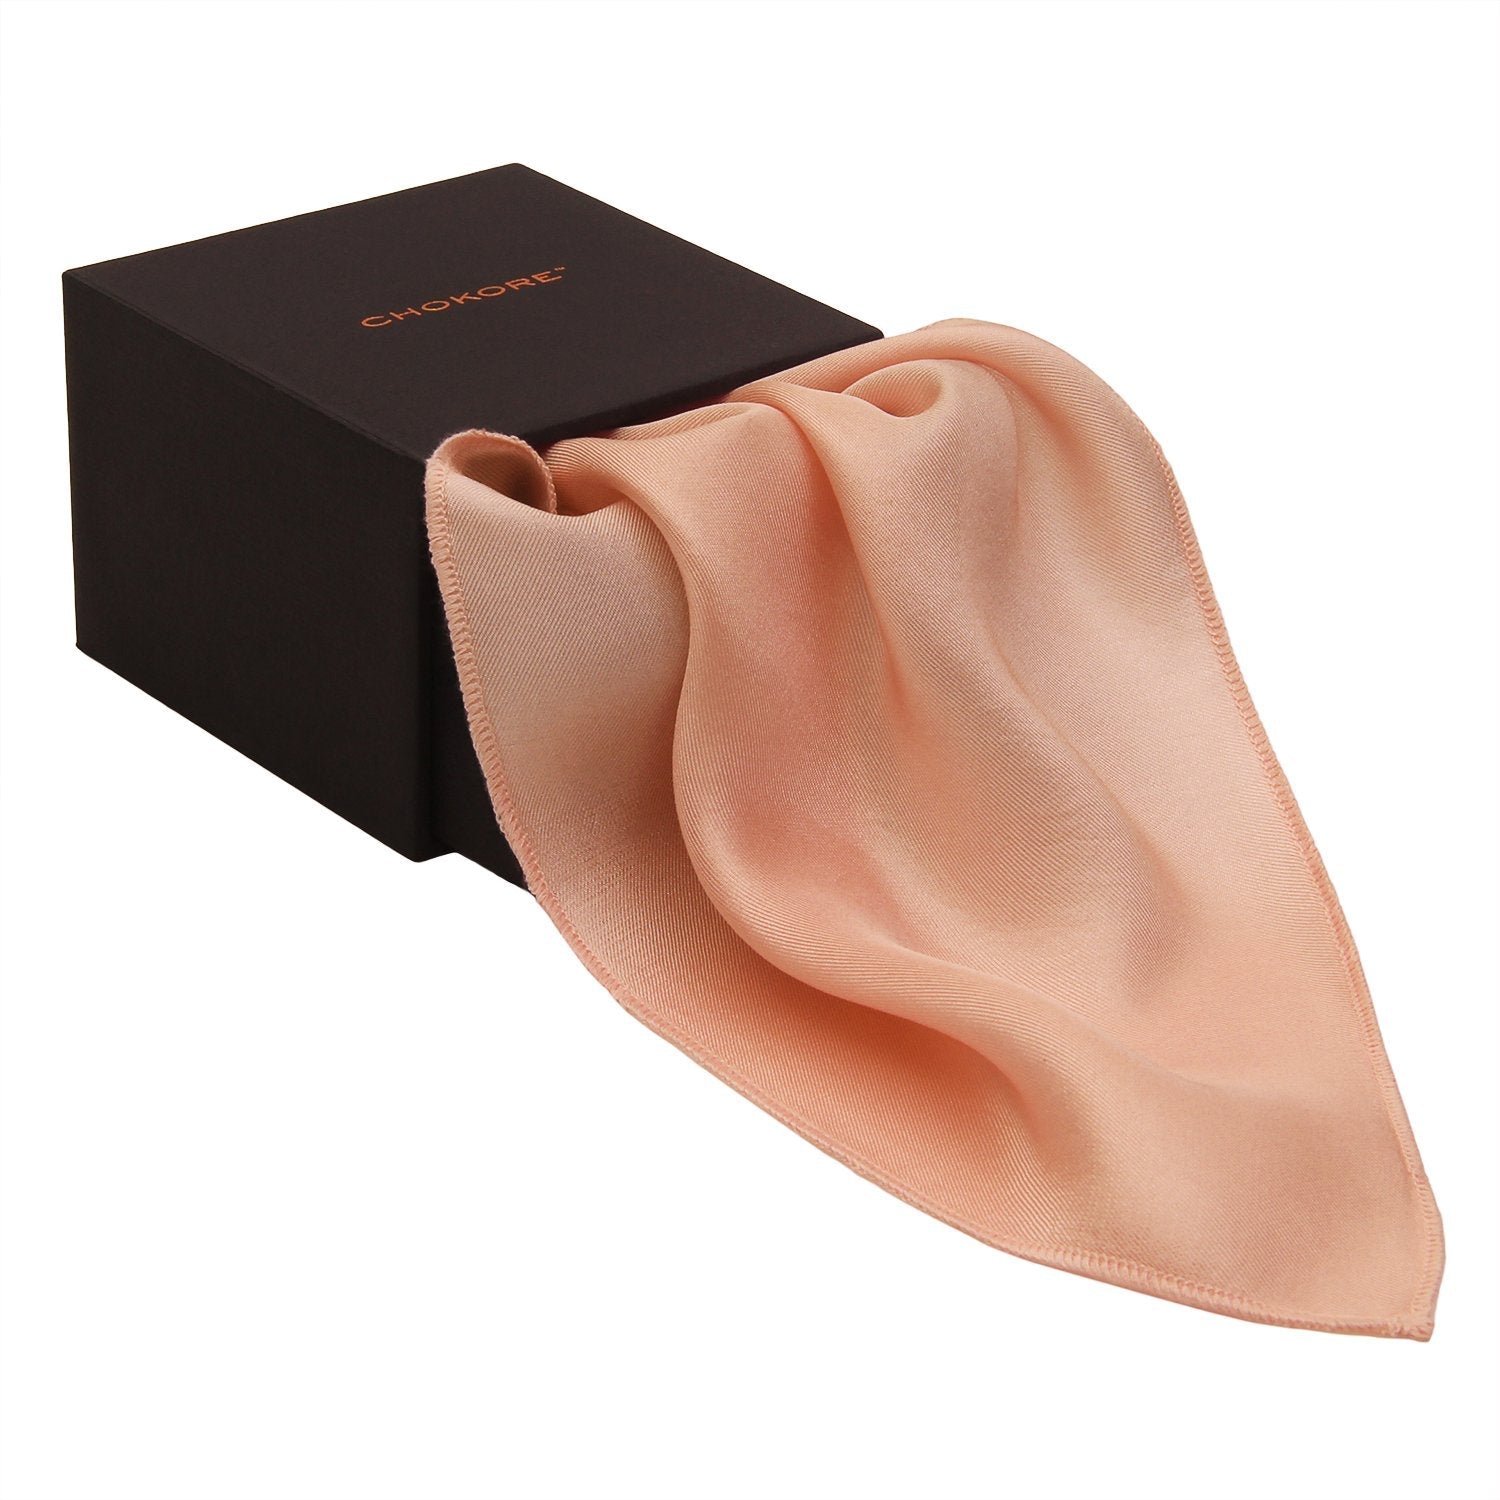 Chokore Peach Pure Silk Pocket Square, from the Solids Line